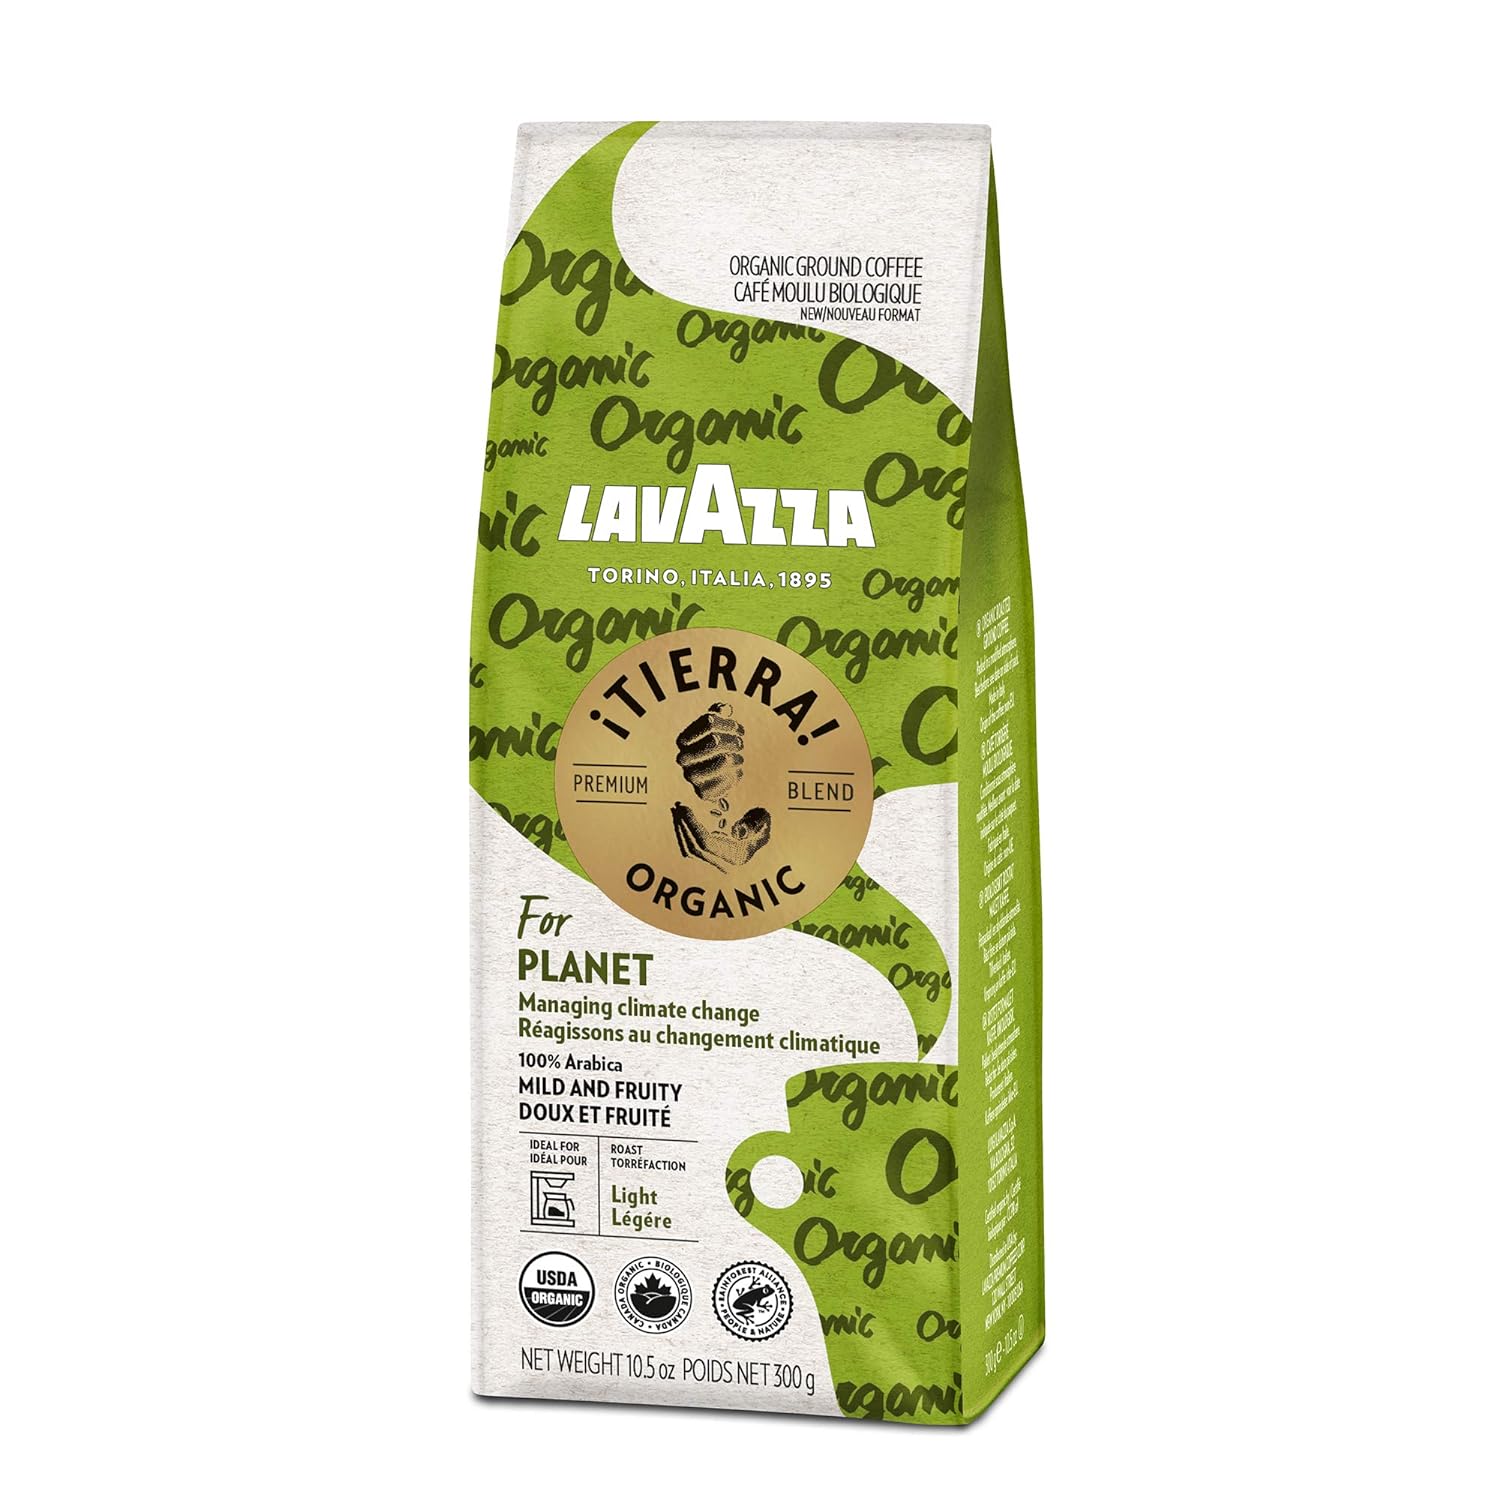 Lavazza ¡Tierra! Organic Planet Ground Coffee Light Roast, 10.5 Oz (Pack of 6) Authentic Italian, Value Pack, Blended And Roated in Italy, 100% USDA Organic Arabica coffees : Grocery & Gourmet Food